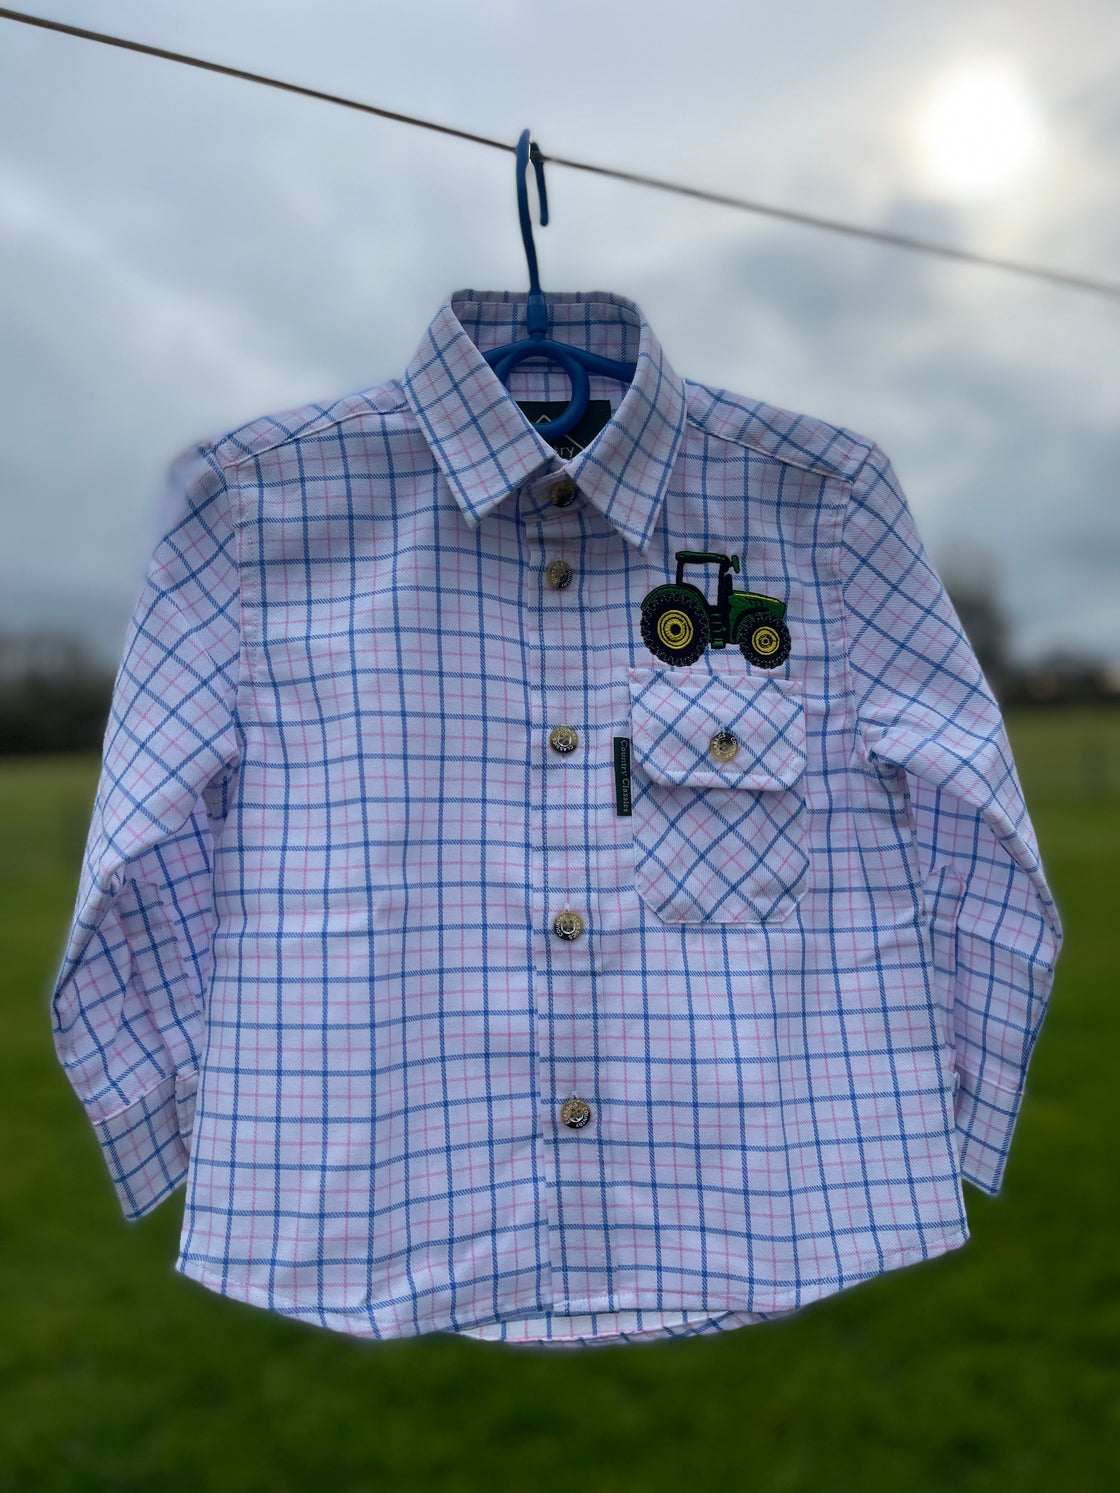 Shirt Embroidery With Tractor Or Animal Design